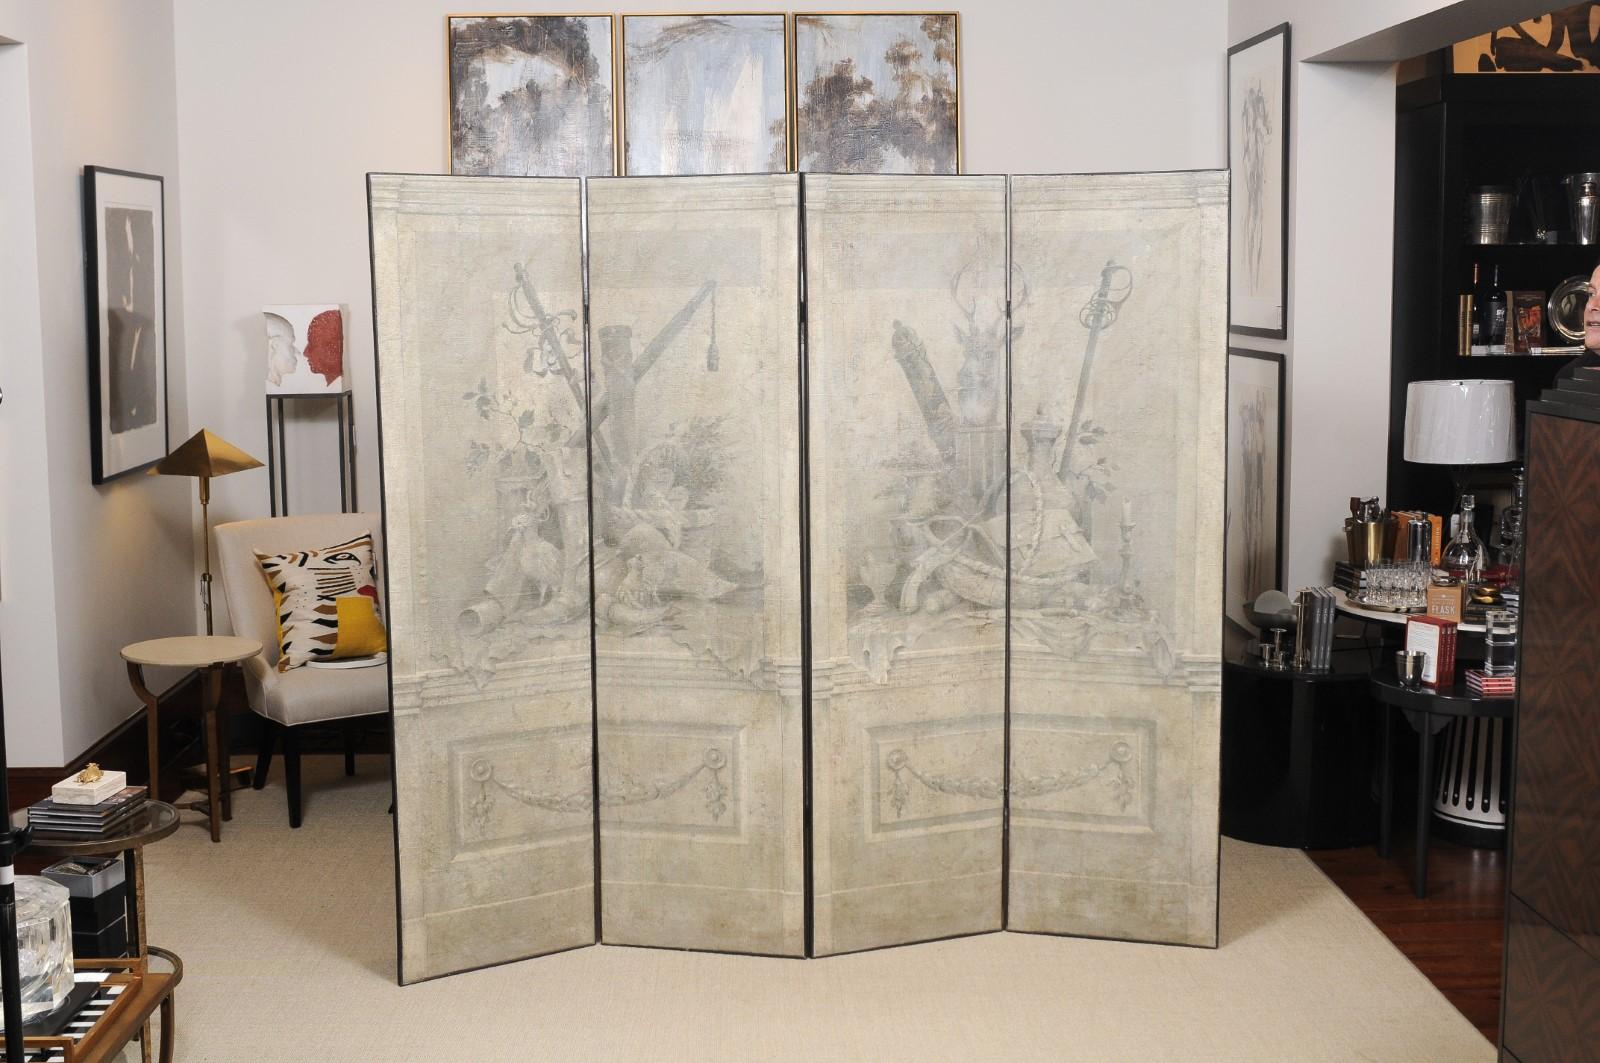 Fontainebleau screen; a four-panel hand painted natural fiber Grisailles screen features trompe l'oeil hunting implements reminiscent of the royal hunting lodge of Fontainebleau. Original artwork by Raymond Goins.